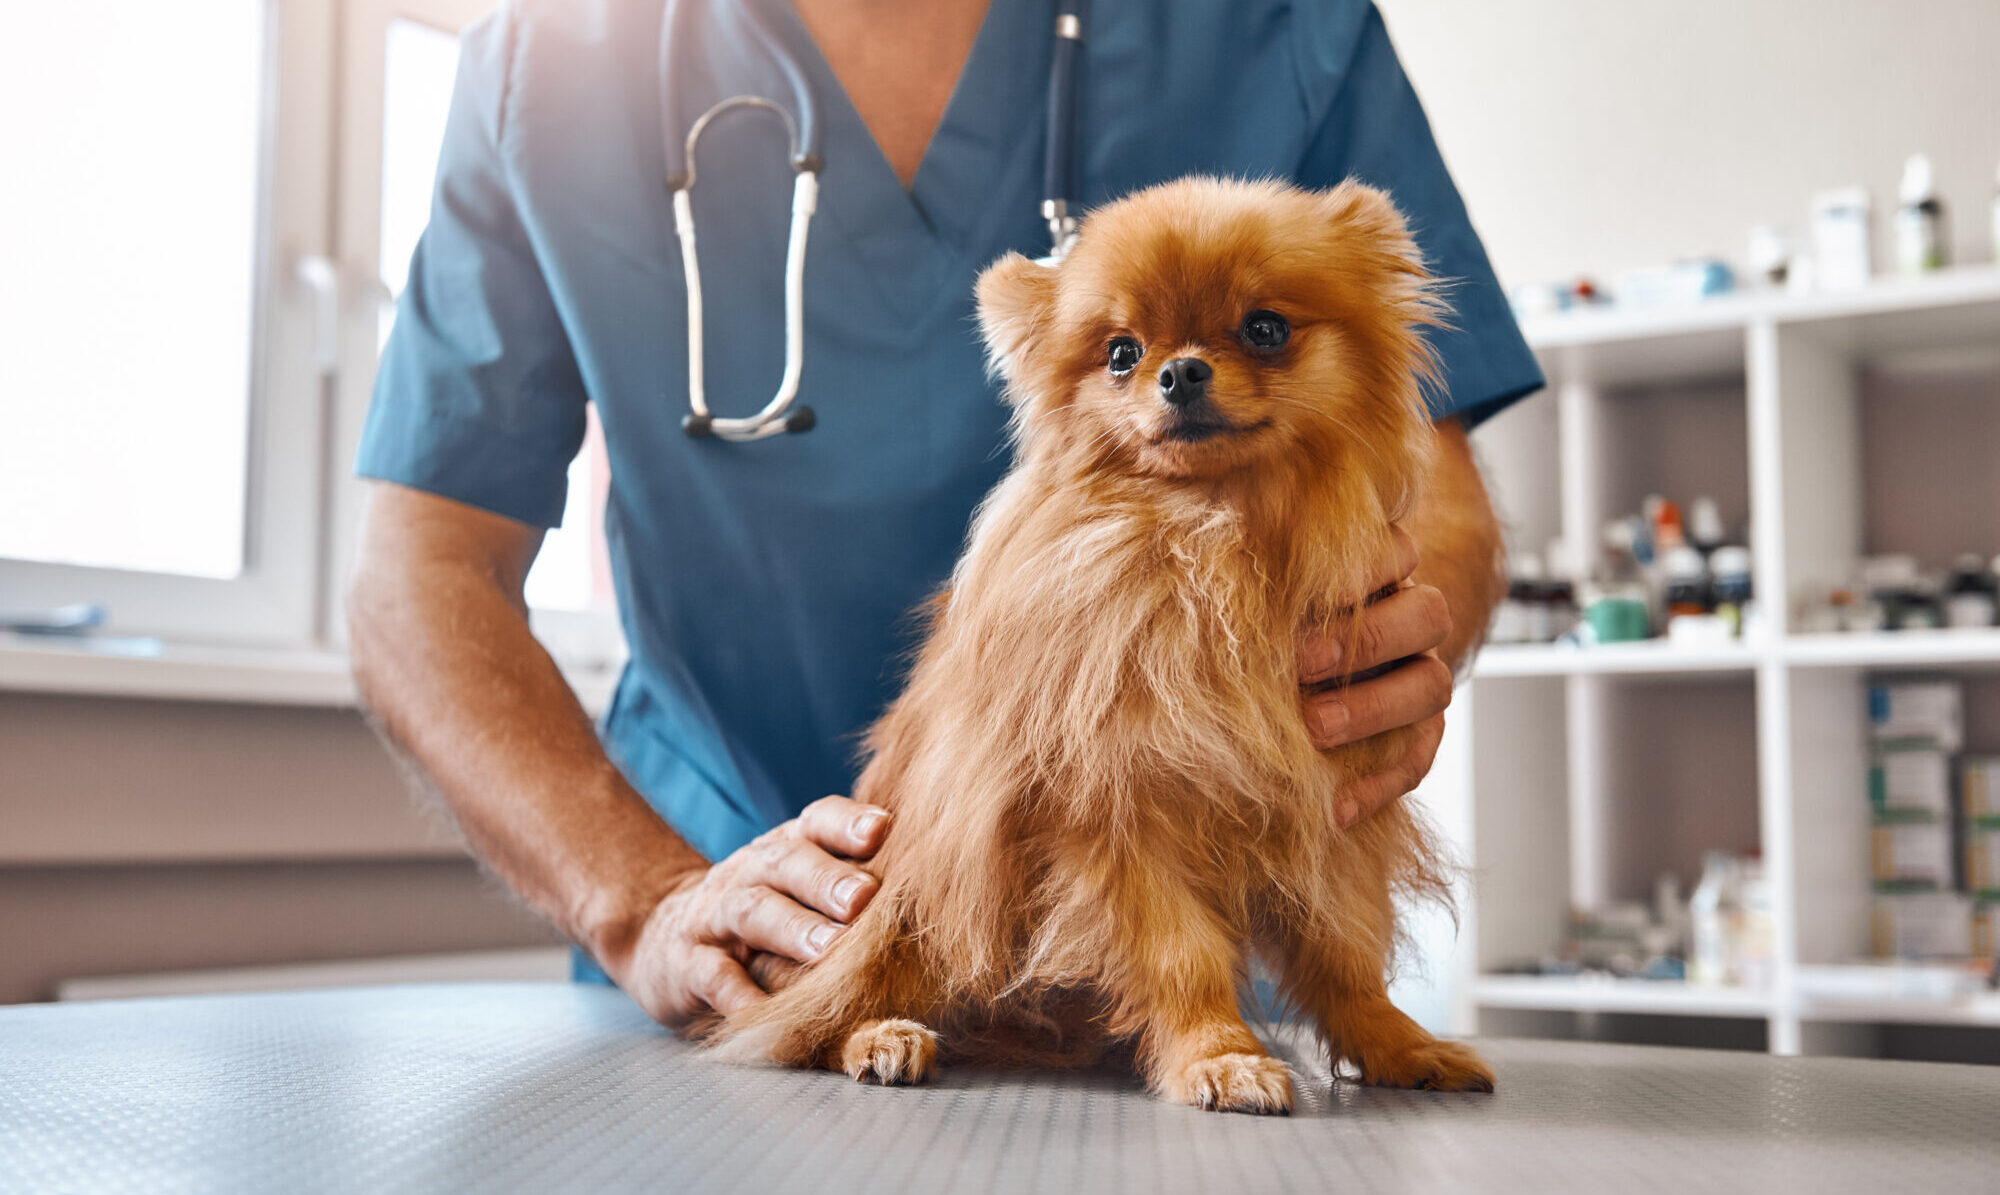 What Are the Signs You Should Take Your Pet to a Veterinarian?